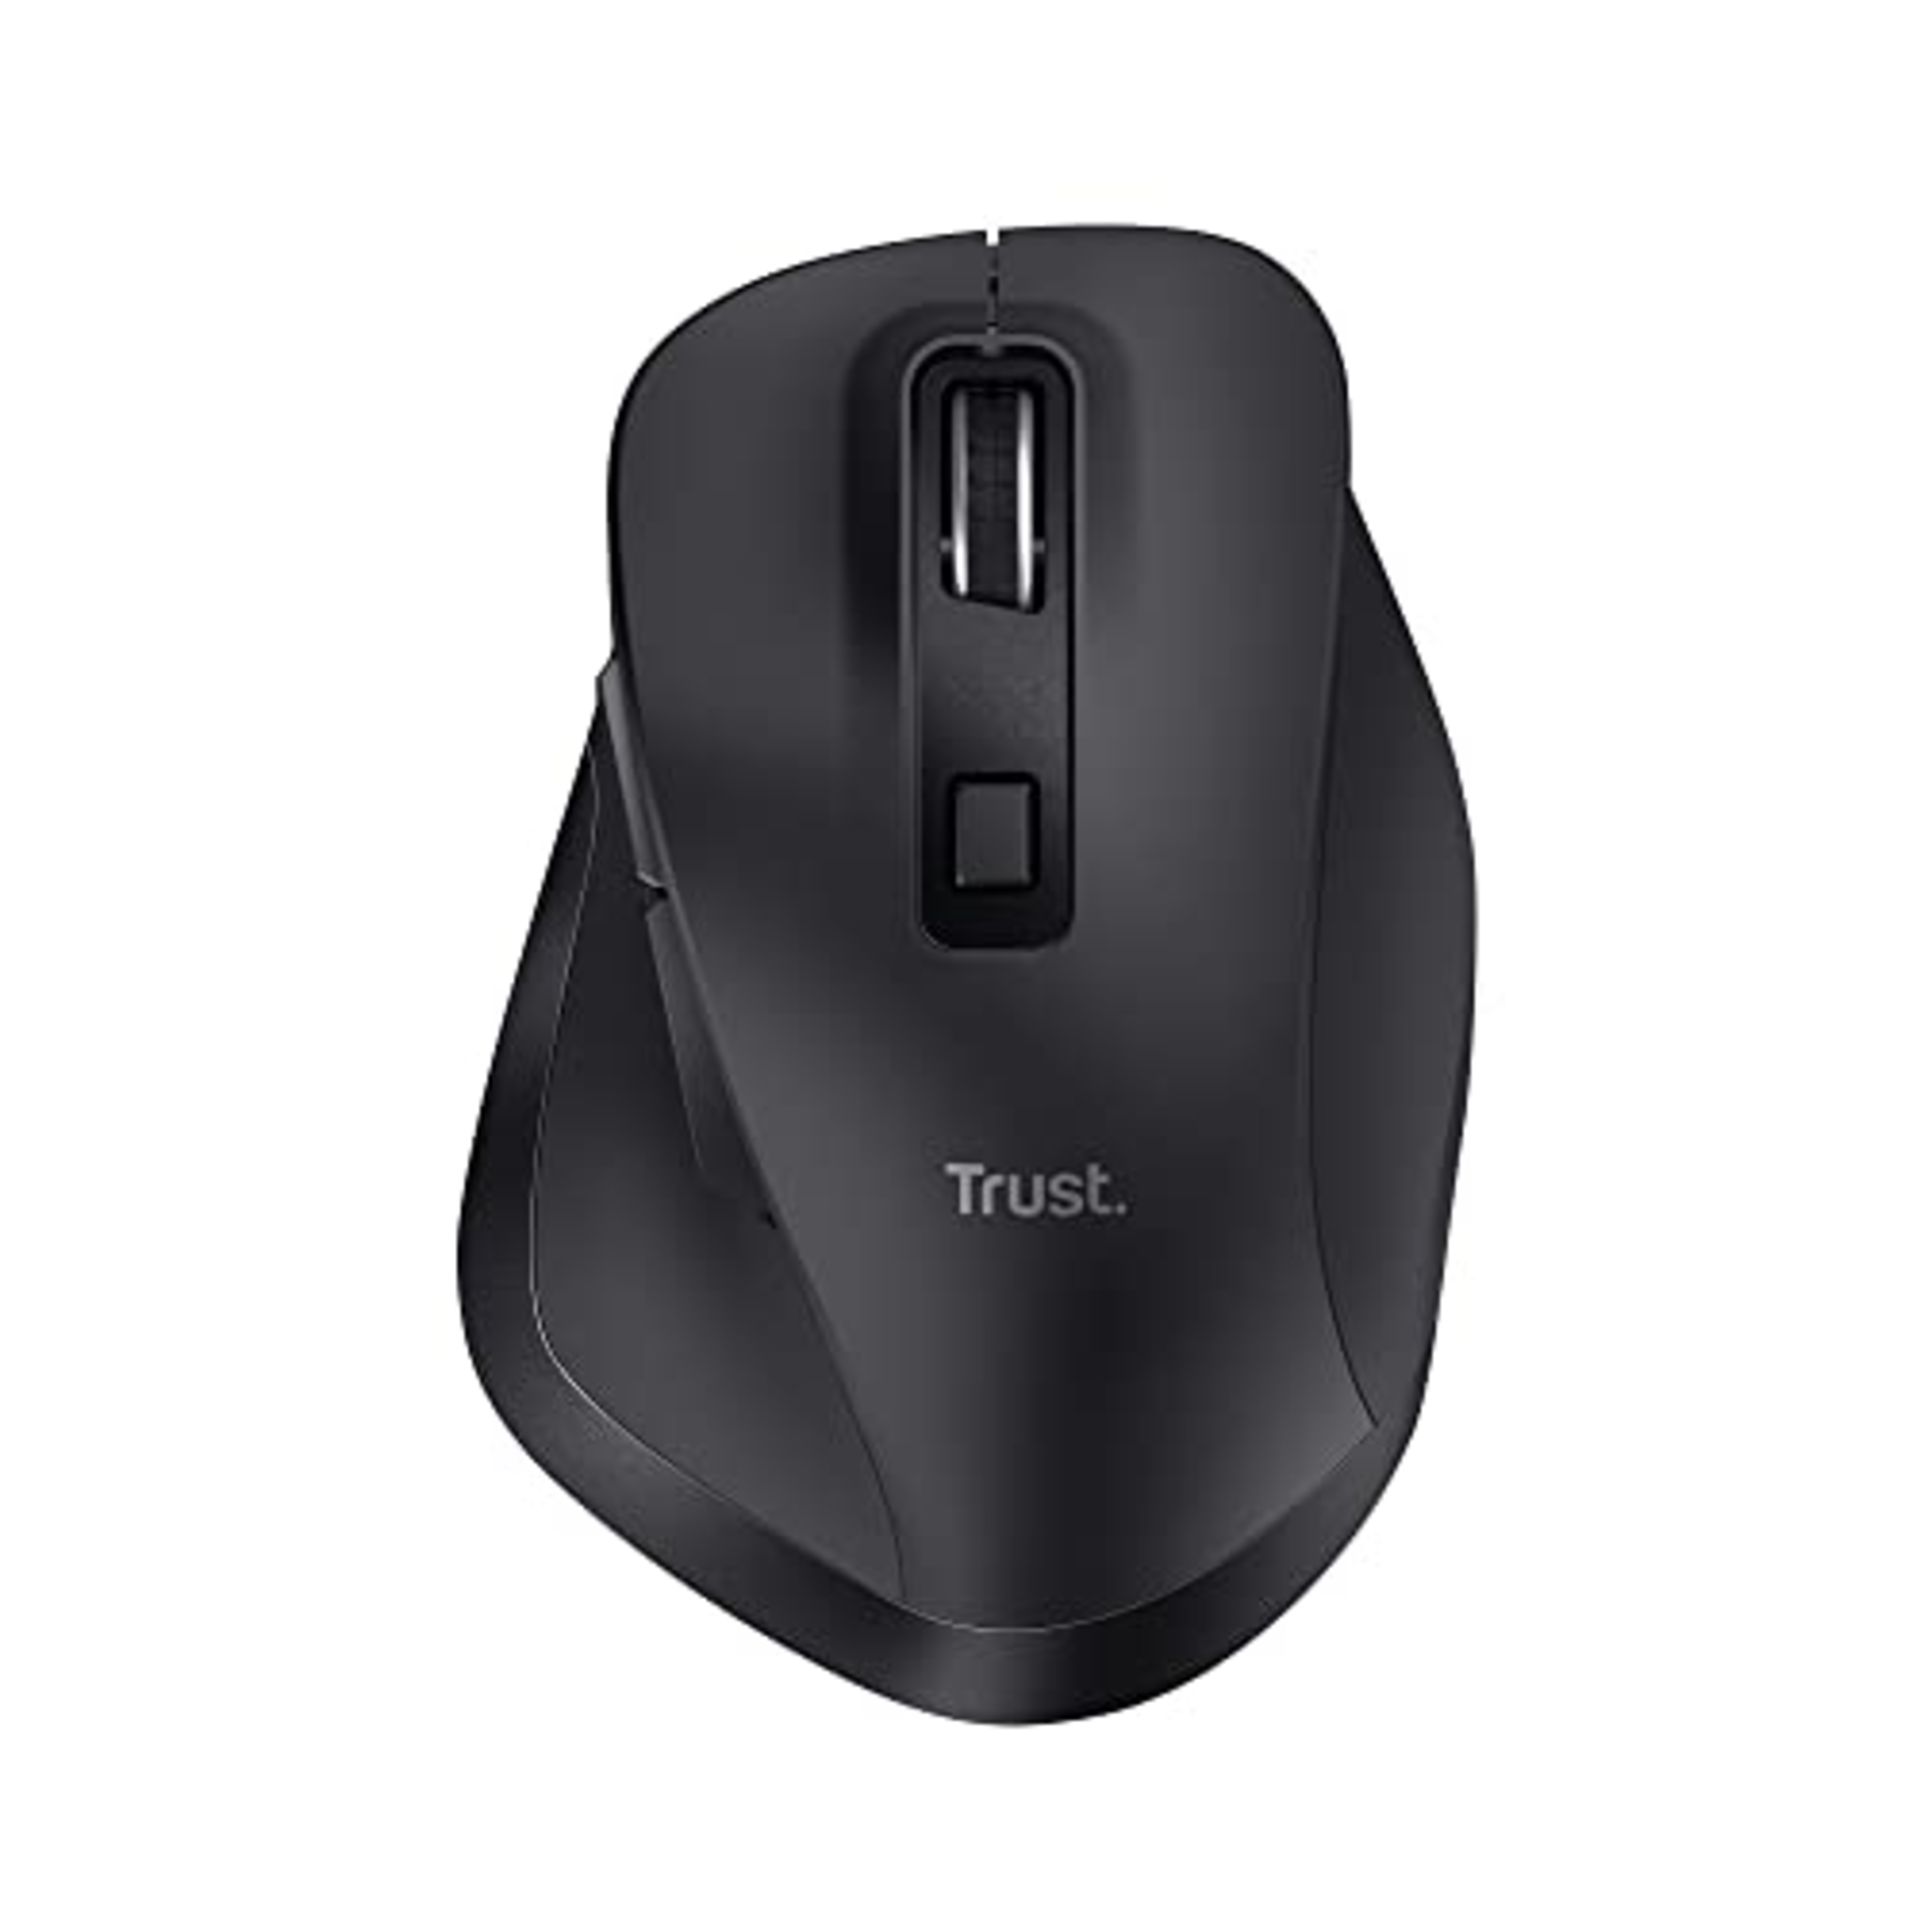 Trust Fyda Mouse Wireless Rechargeable, Sustainable Design, 800-2400 DPI, 6 Buttons, 2